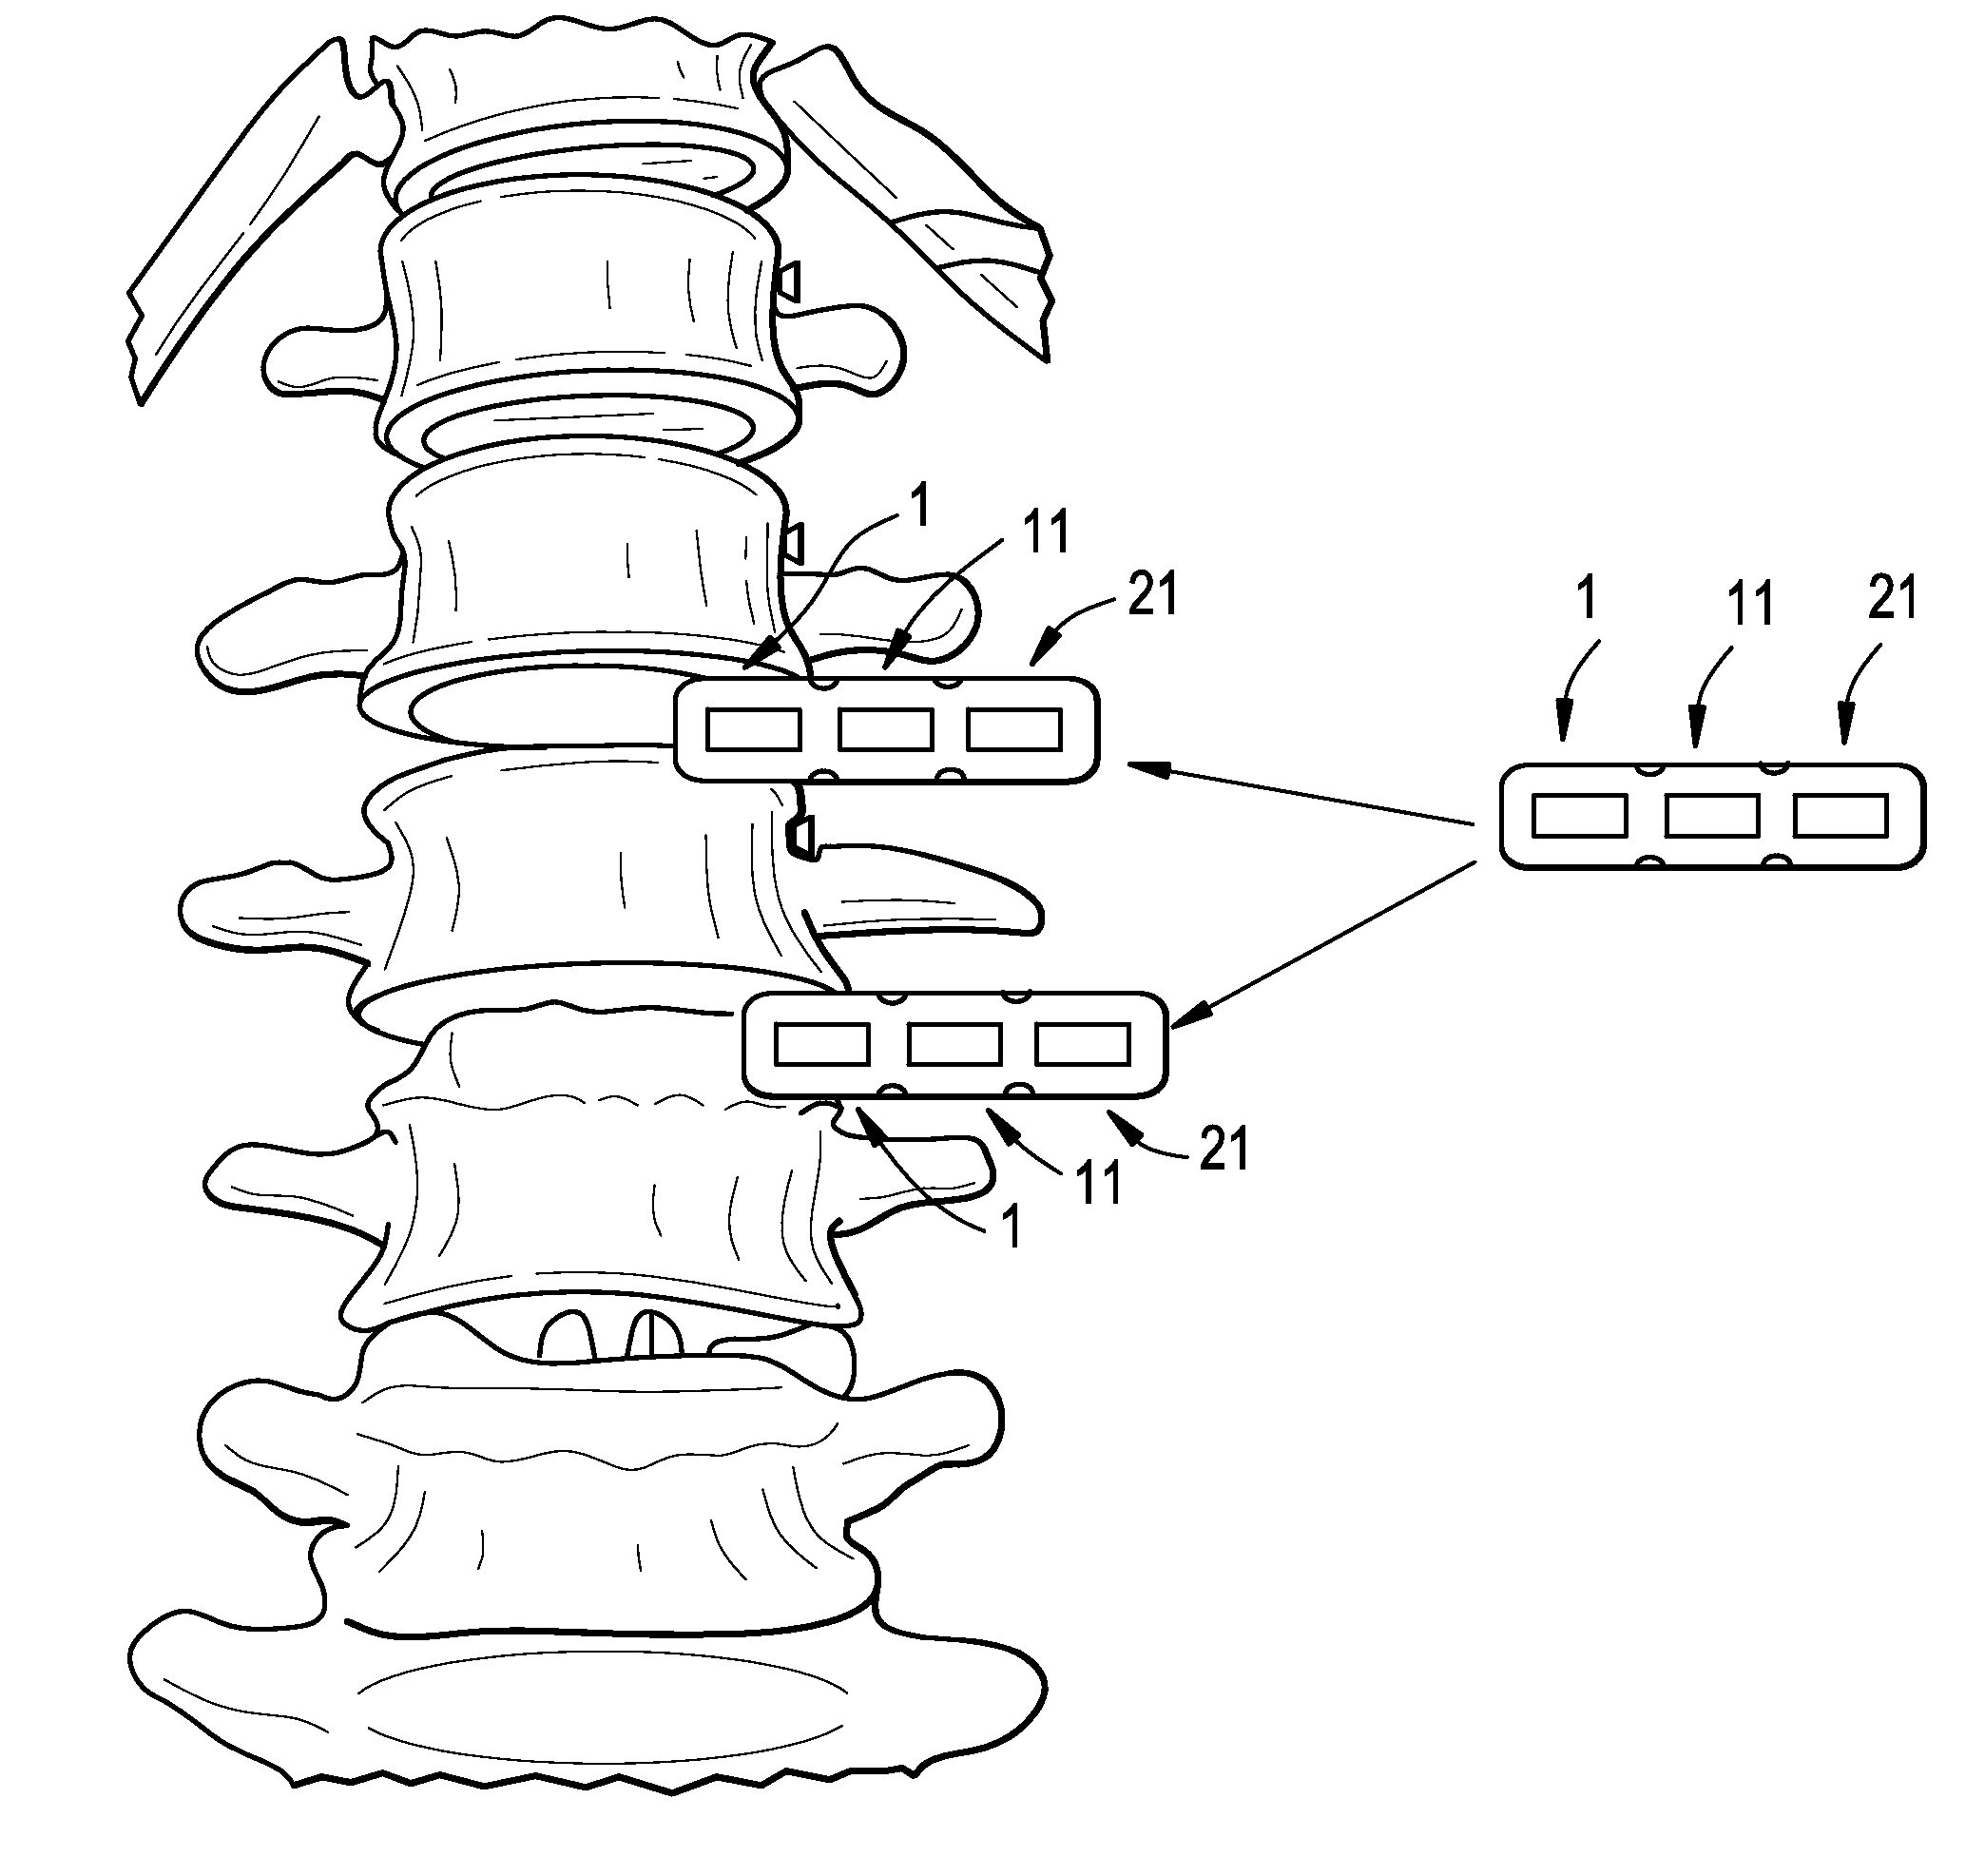 Multi-Segment Lateral Cage Adapted to Flex Substantially in the Coronal Plane